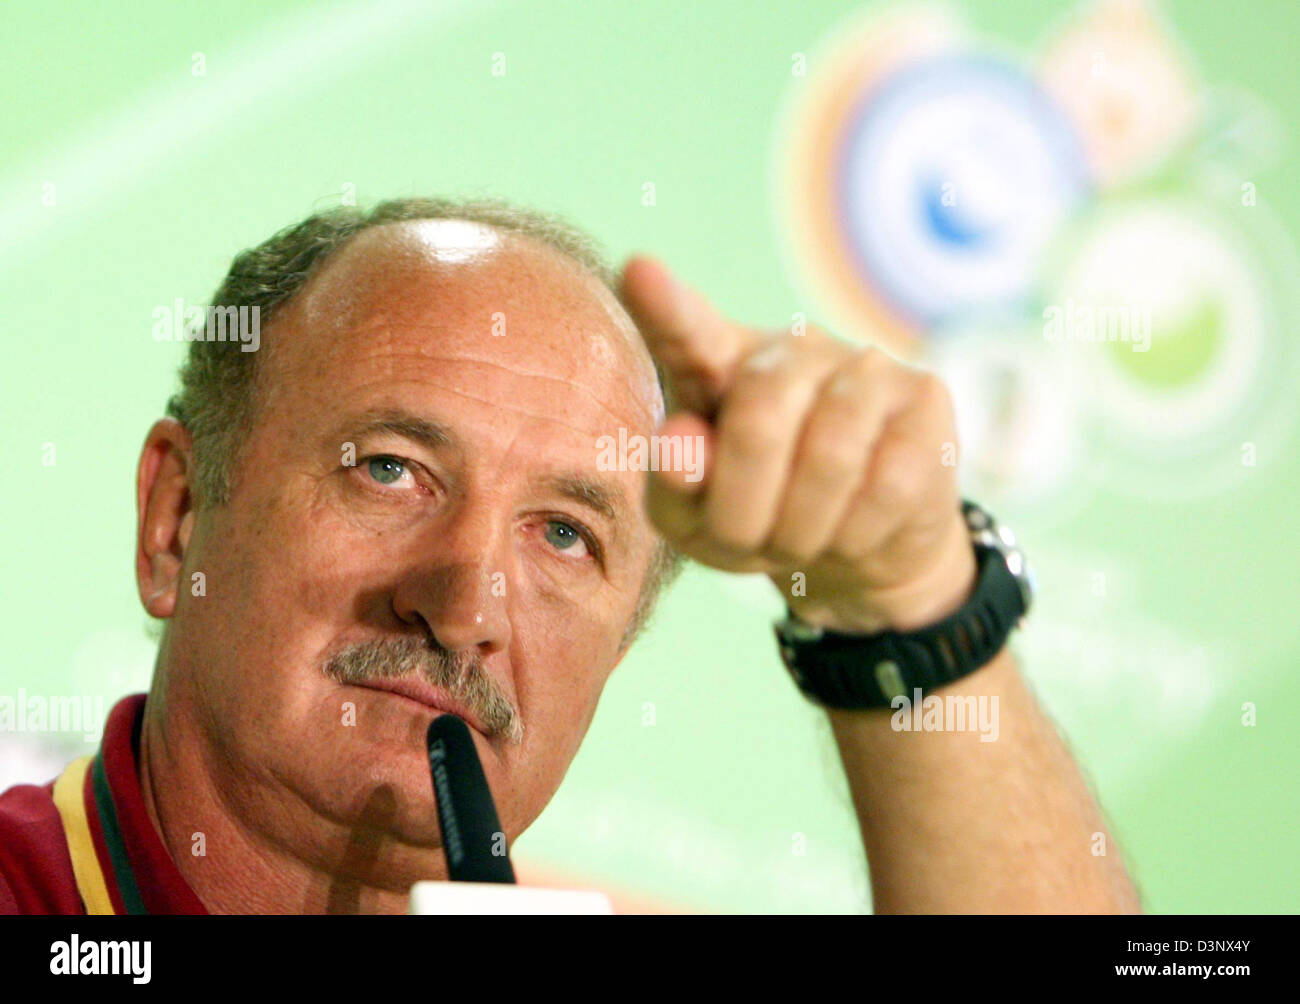 Portugal national coach Brazilian Luiz Felipe Scolari talks to the media during a press conference in Stuttgart, Germany, Friday, 07 July 2006. Portugal will play Germany in the FIFA World Cup 3rd Place match in Stuttgart on Saturday, 08 July 2006. DPA/BERND WEISSBROD   +++(c) dpa - Bildfunk+++ Stock Photo